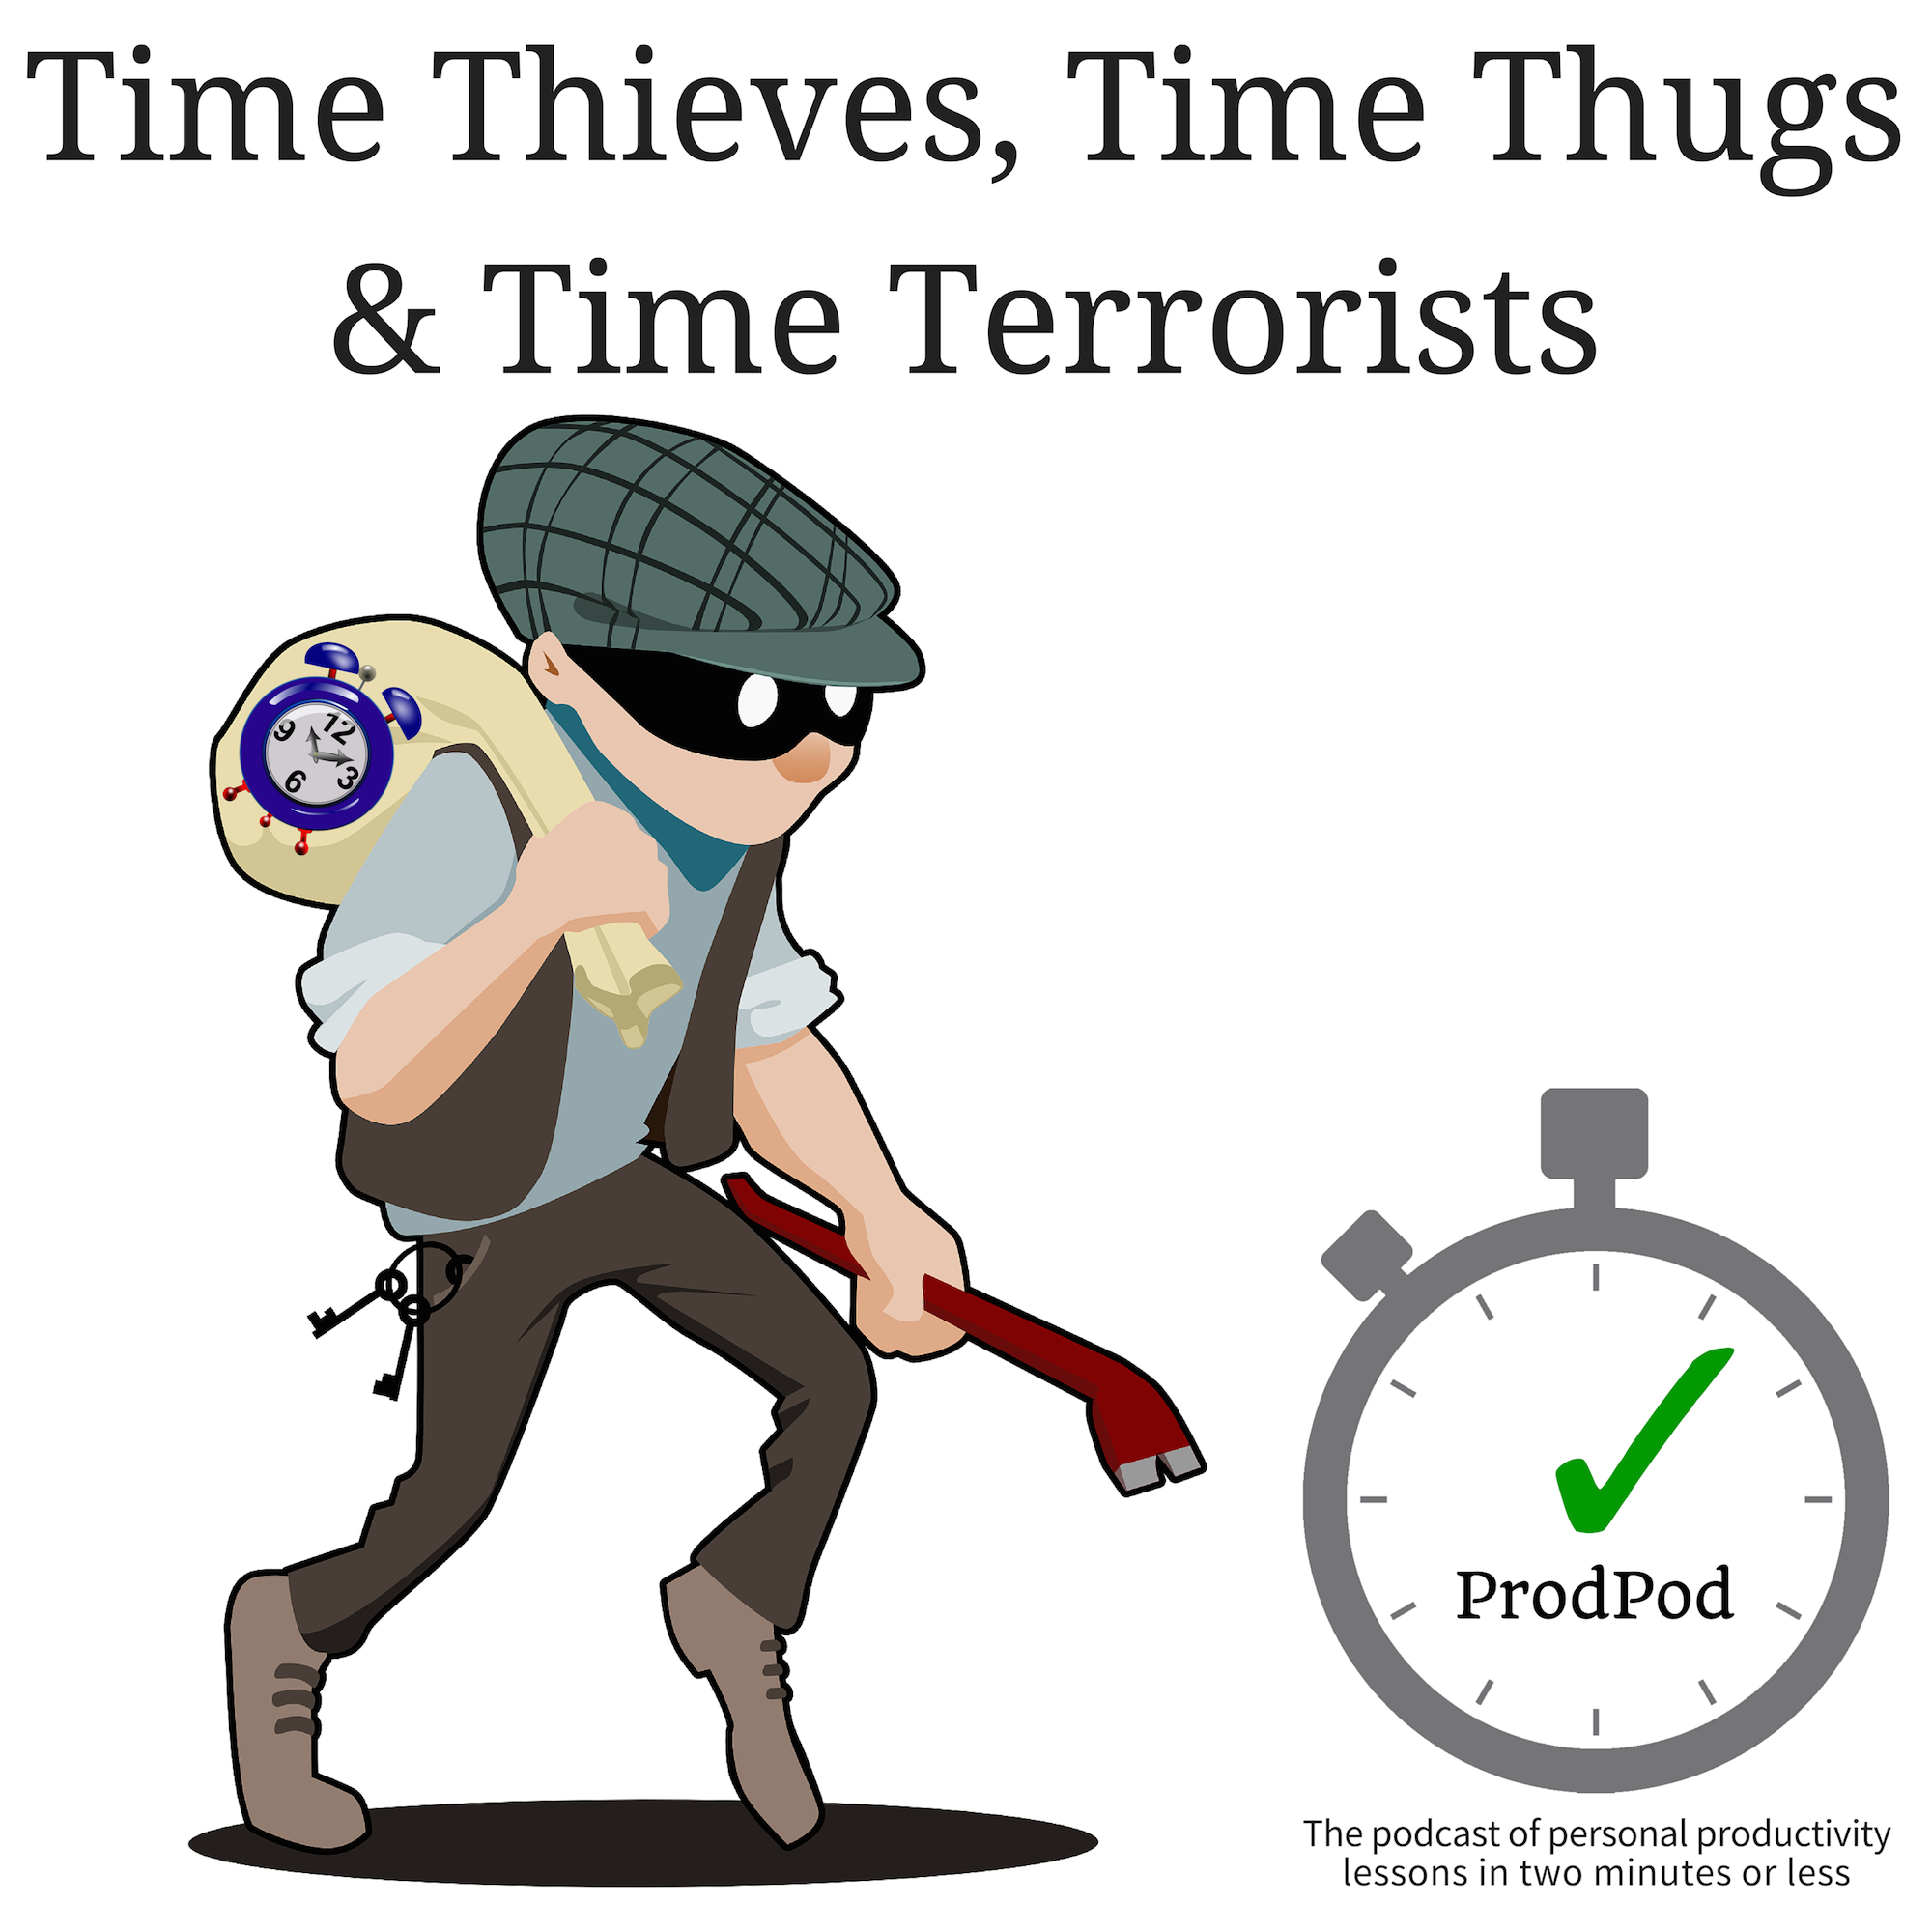 ProdPod: Episode 96–Time Thieves, Thugs and Terrorists - Who They Are So You Can Identify Them Efficiently